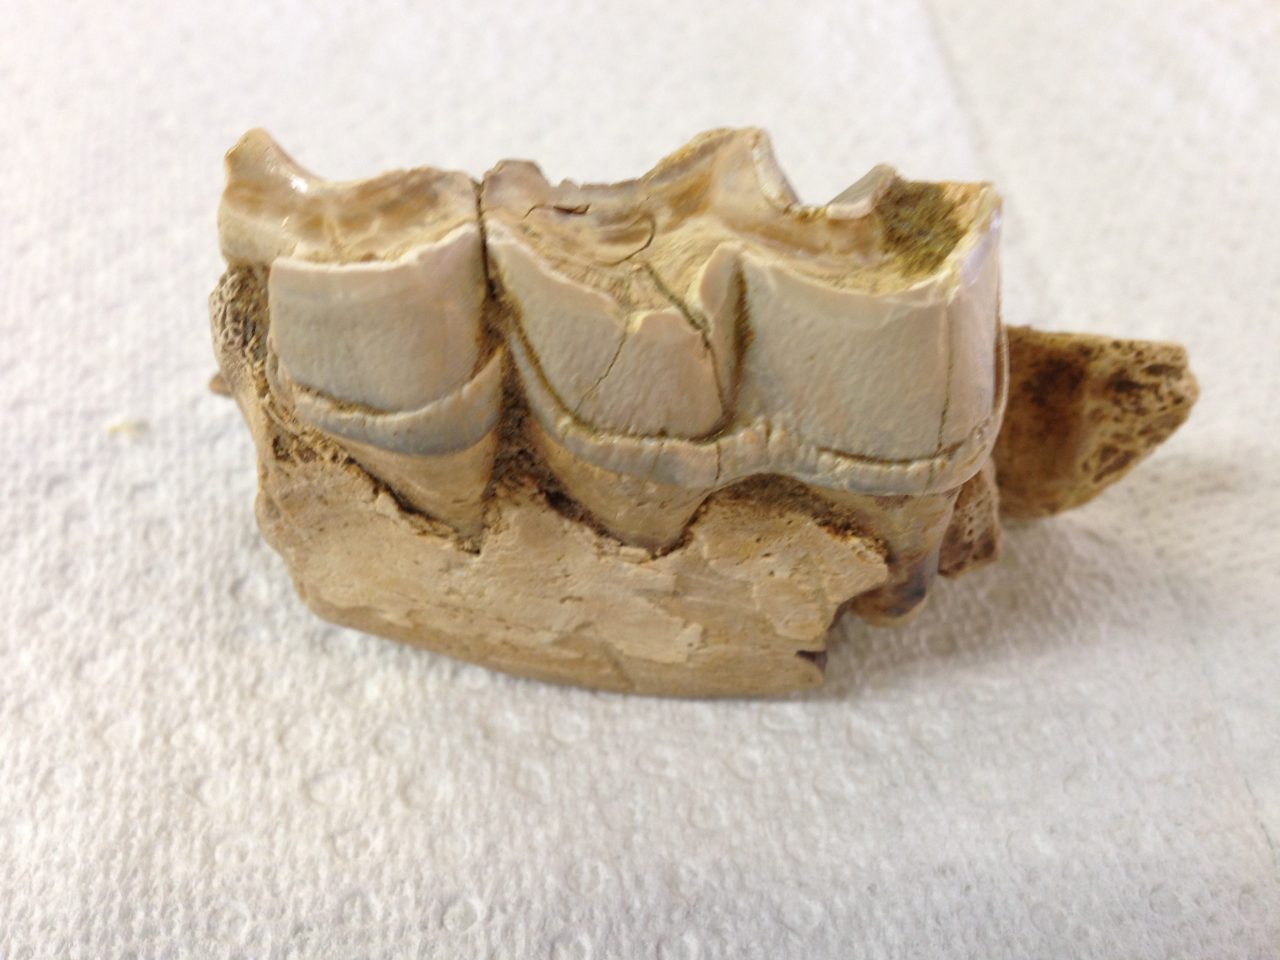 Rhinoceros Jaw Section with 1 1/2 Teeth Menoceras | Fossils & Artifacts for Sale | Paleo Enterprises | Fossils & Artifacts for Sale